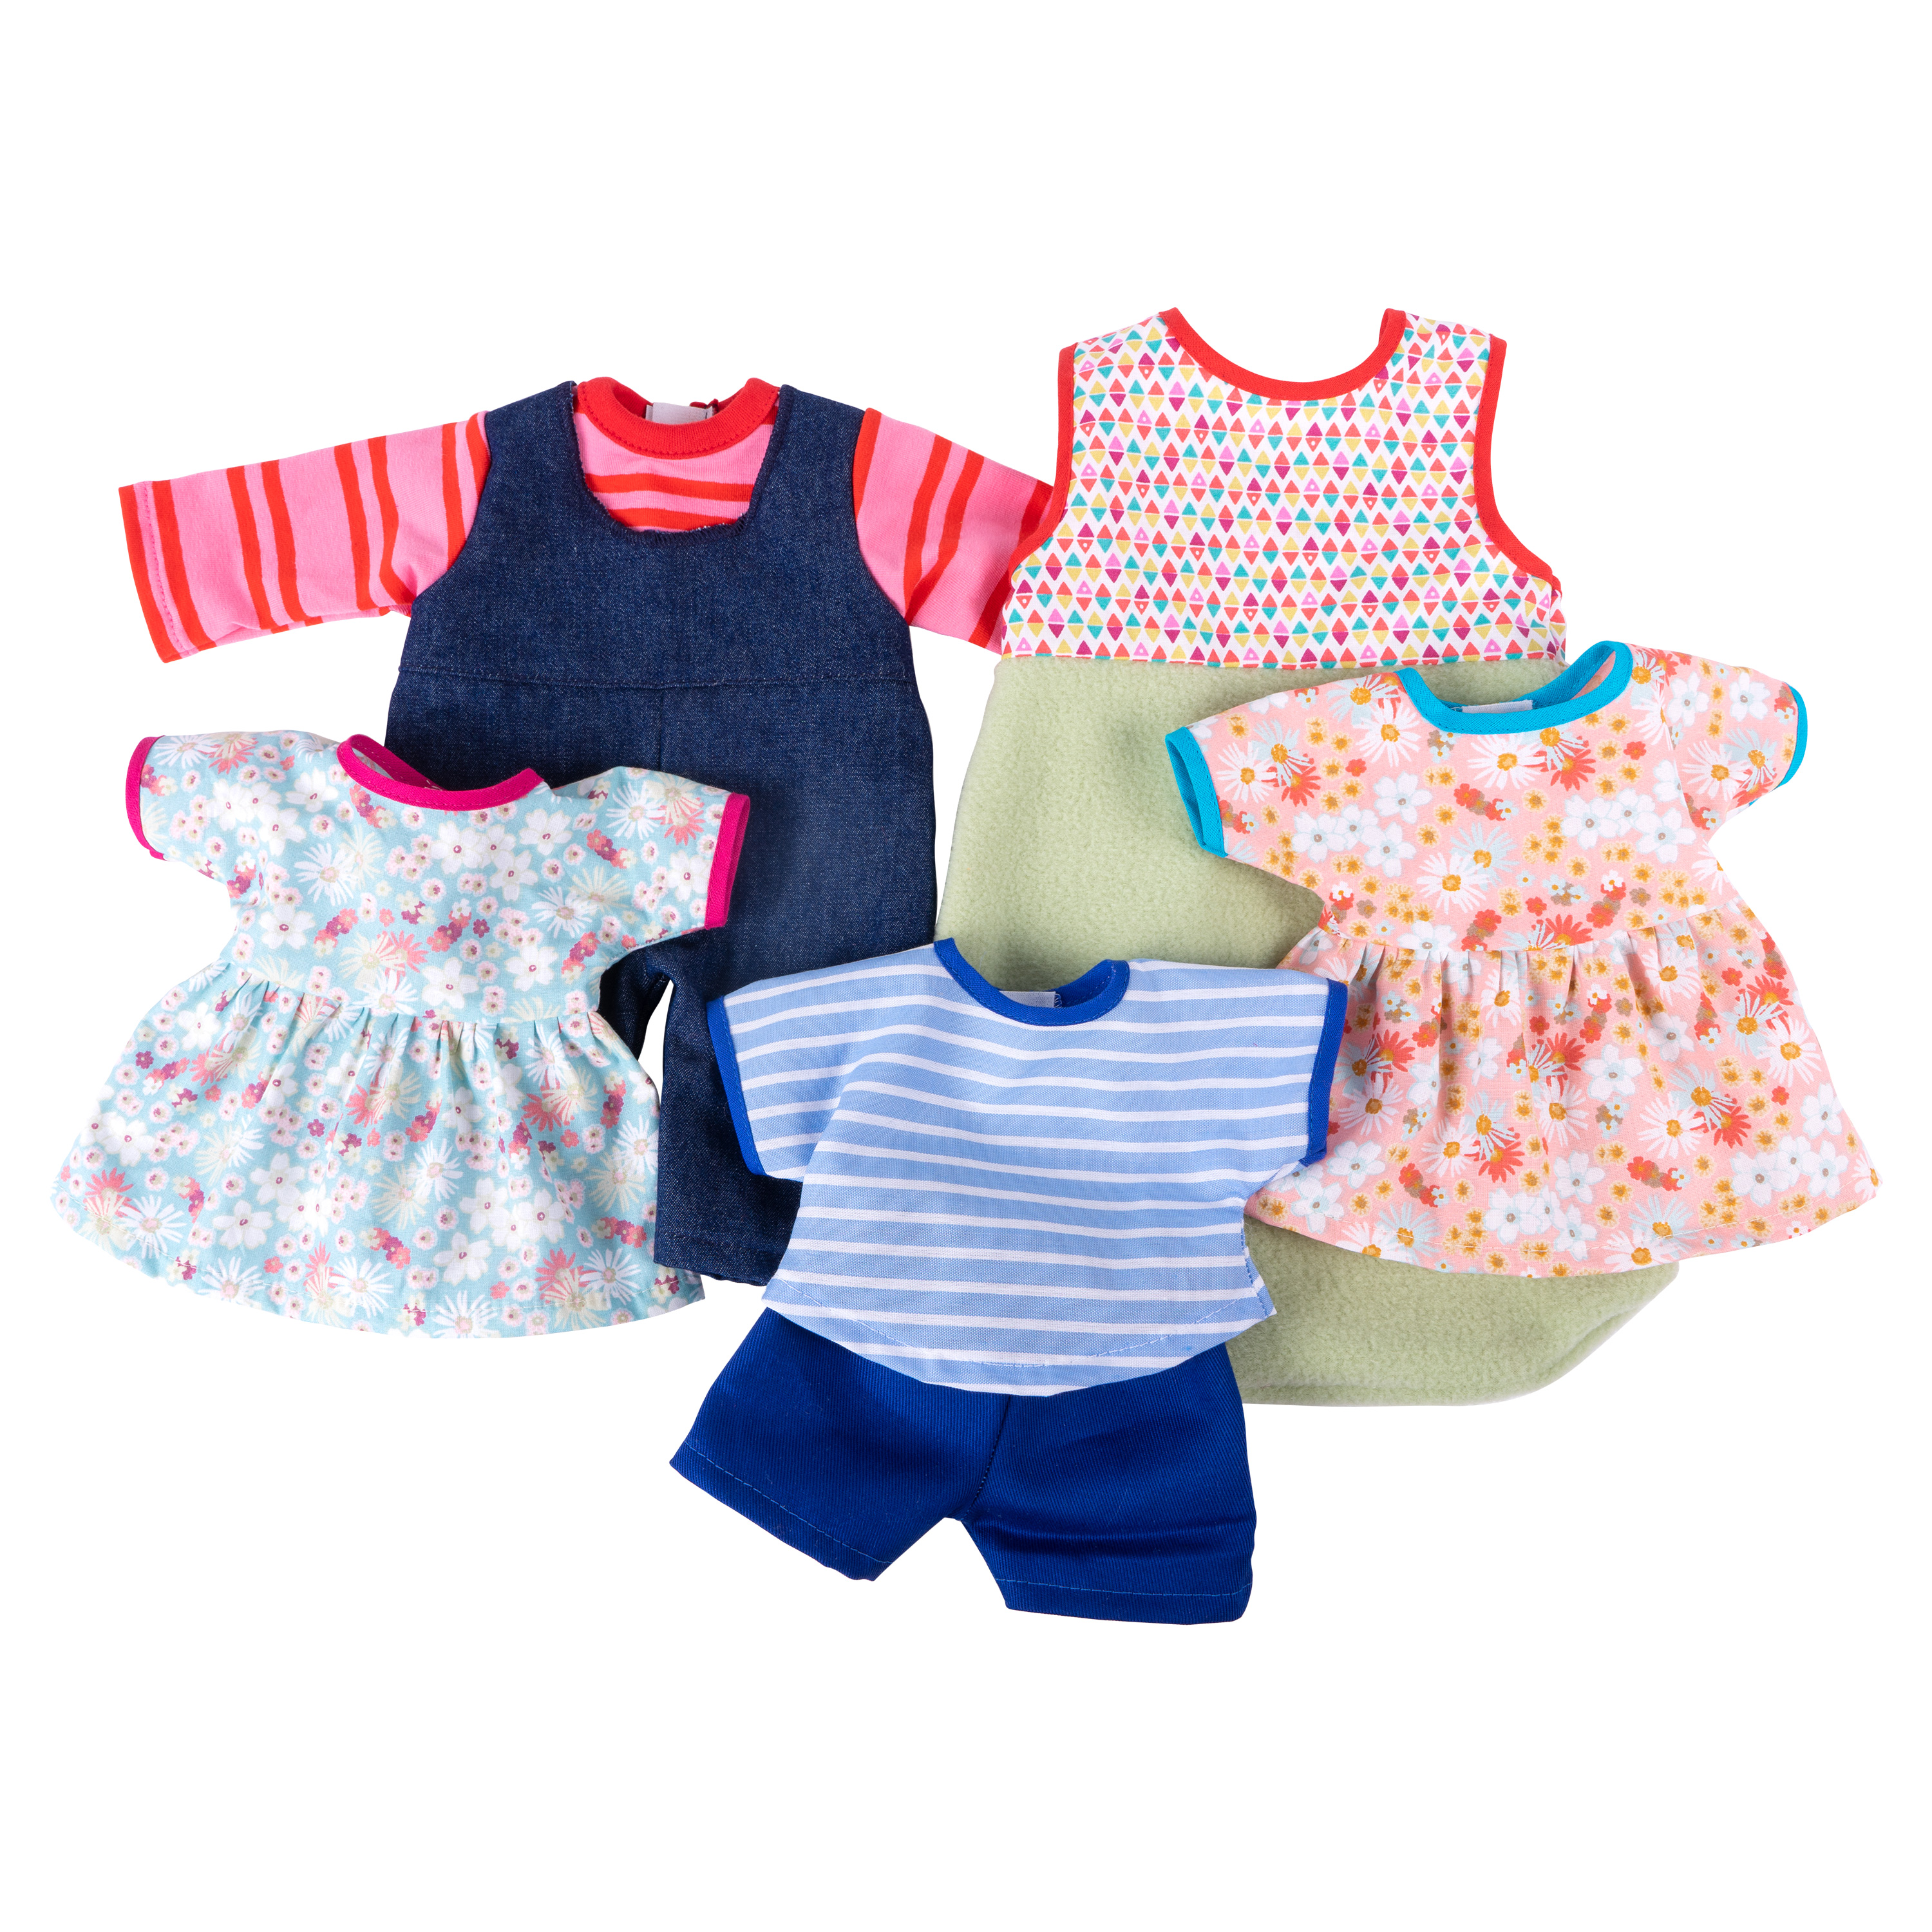 Schwenk Puppenkleidungs-Set Gr. 32, 5 Outfits